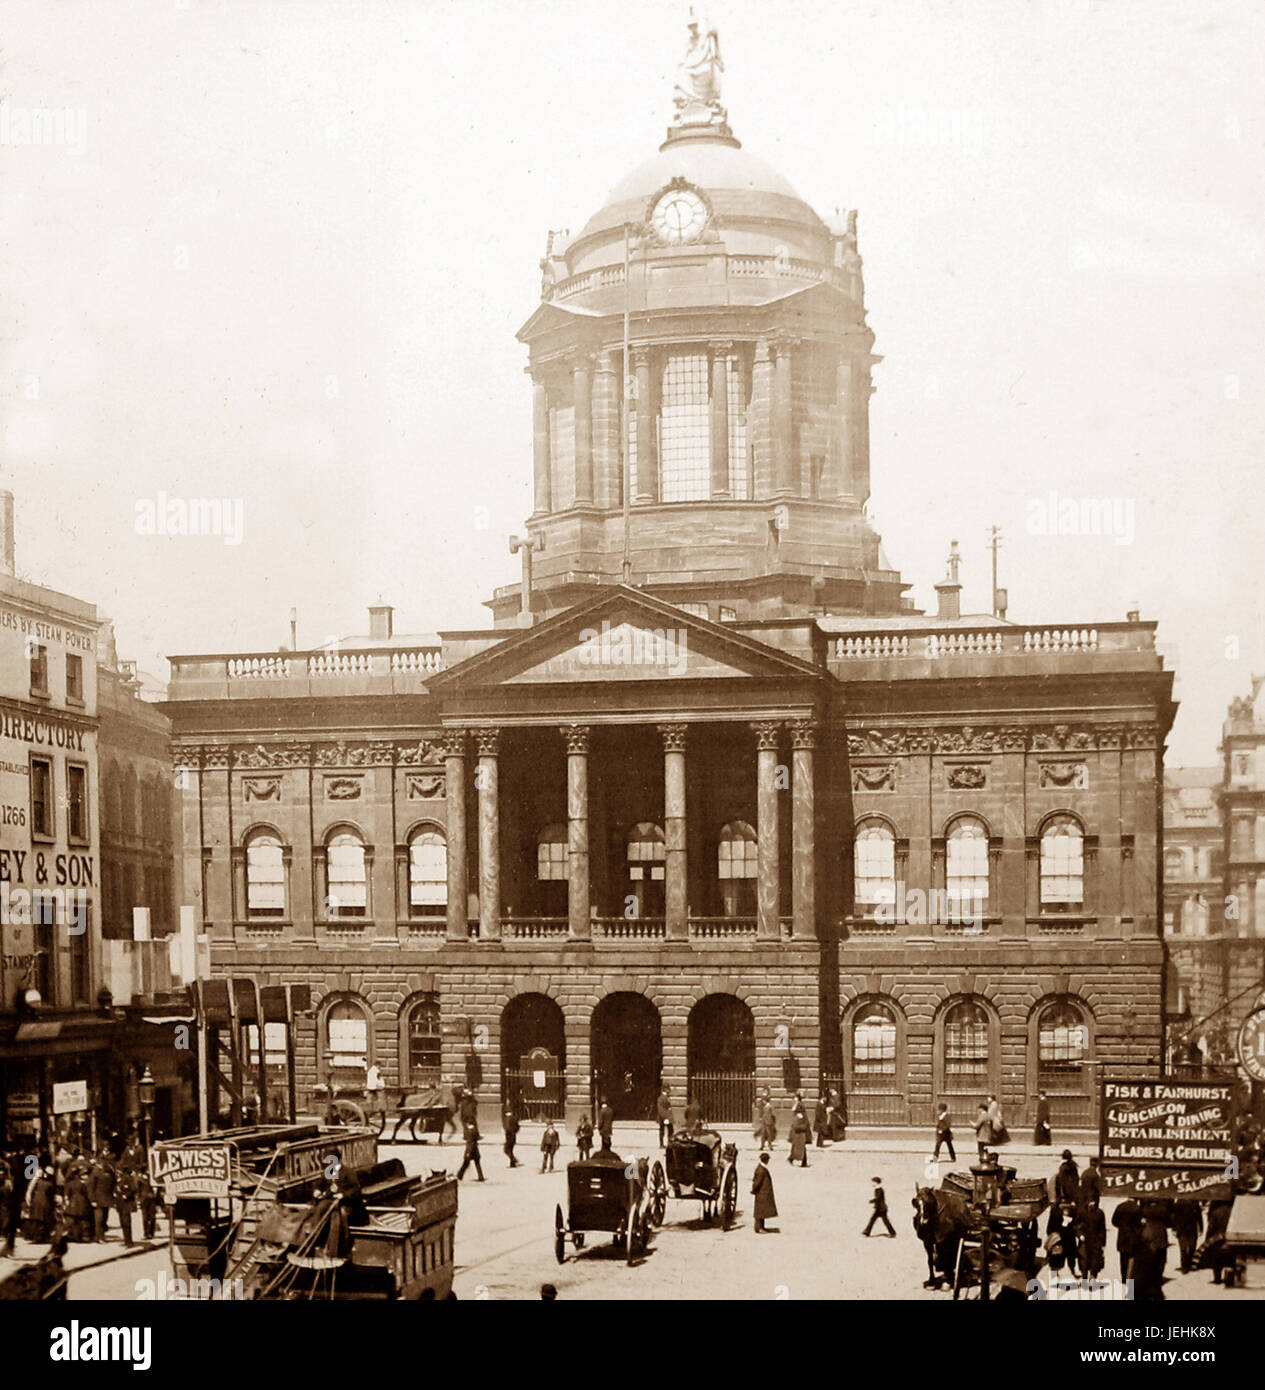 Liverpool Town Hall, en Angleterre, période victorienne Banque D'Images